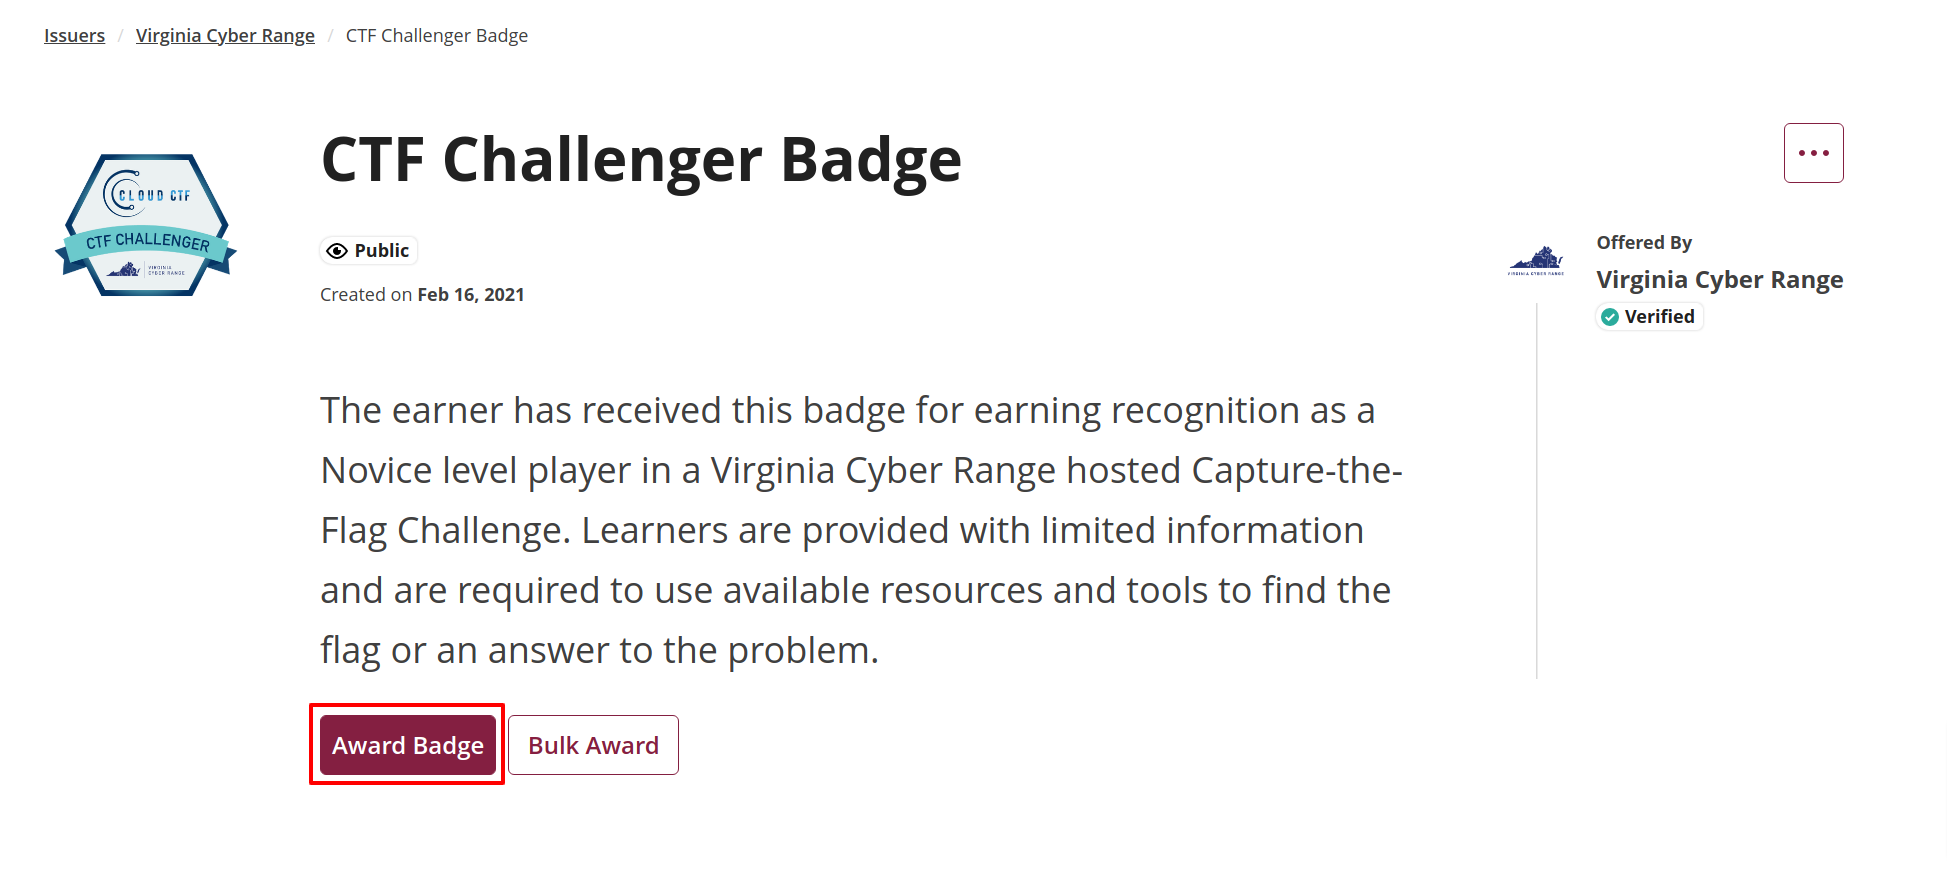 The Award Badge button is found below the description of the badge.